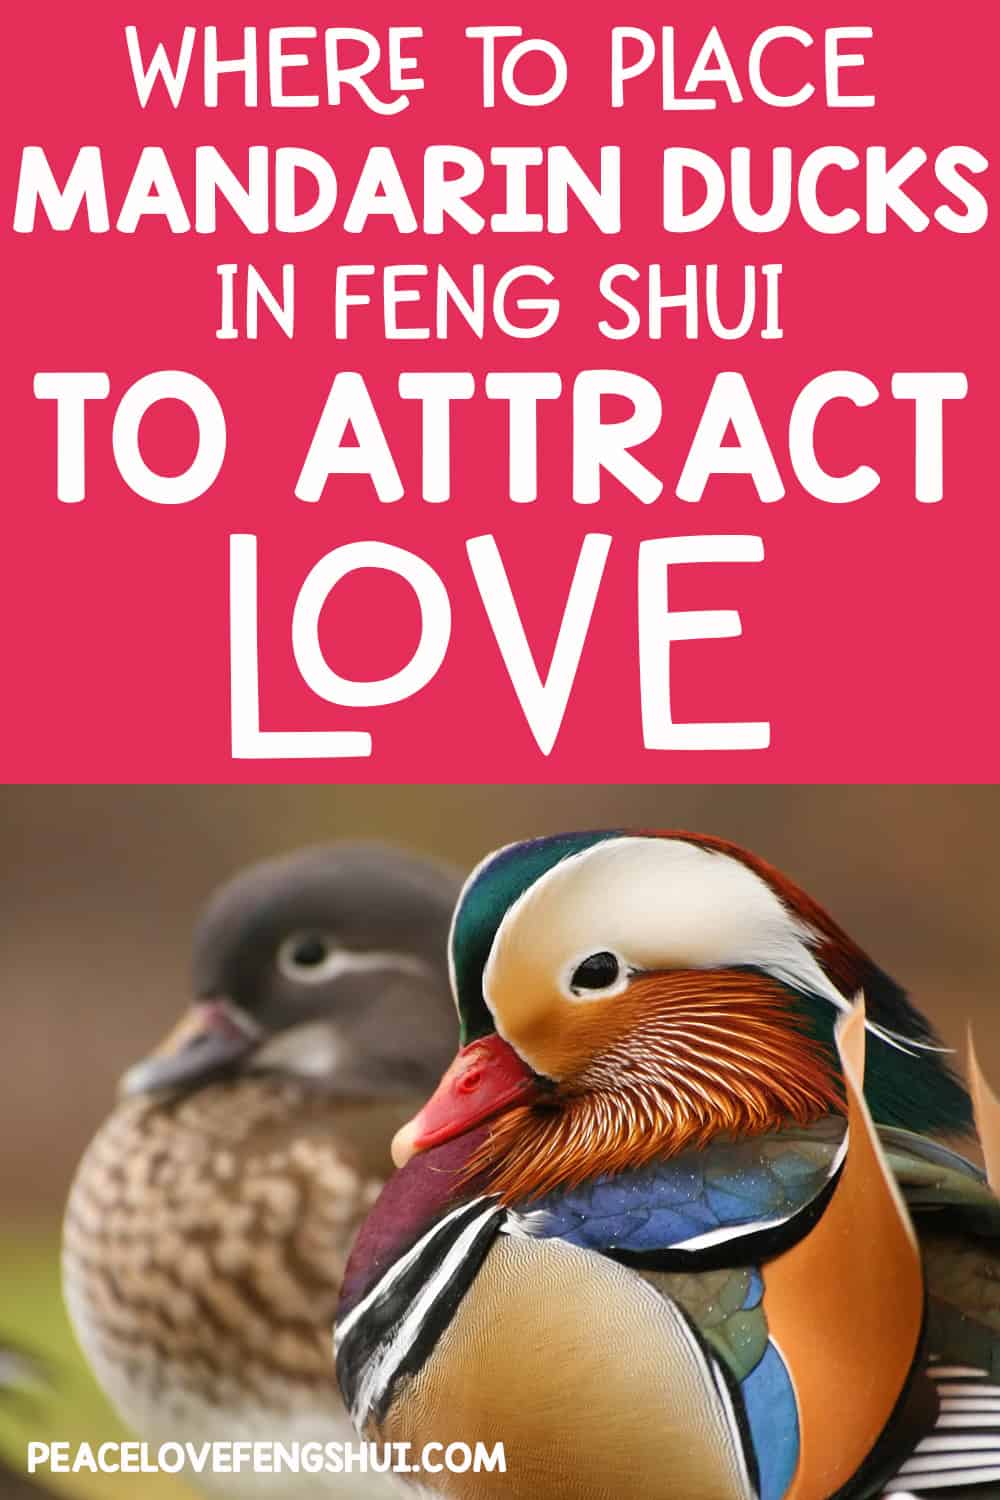 where to place mandarin ducks in feng shui to attract love